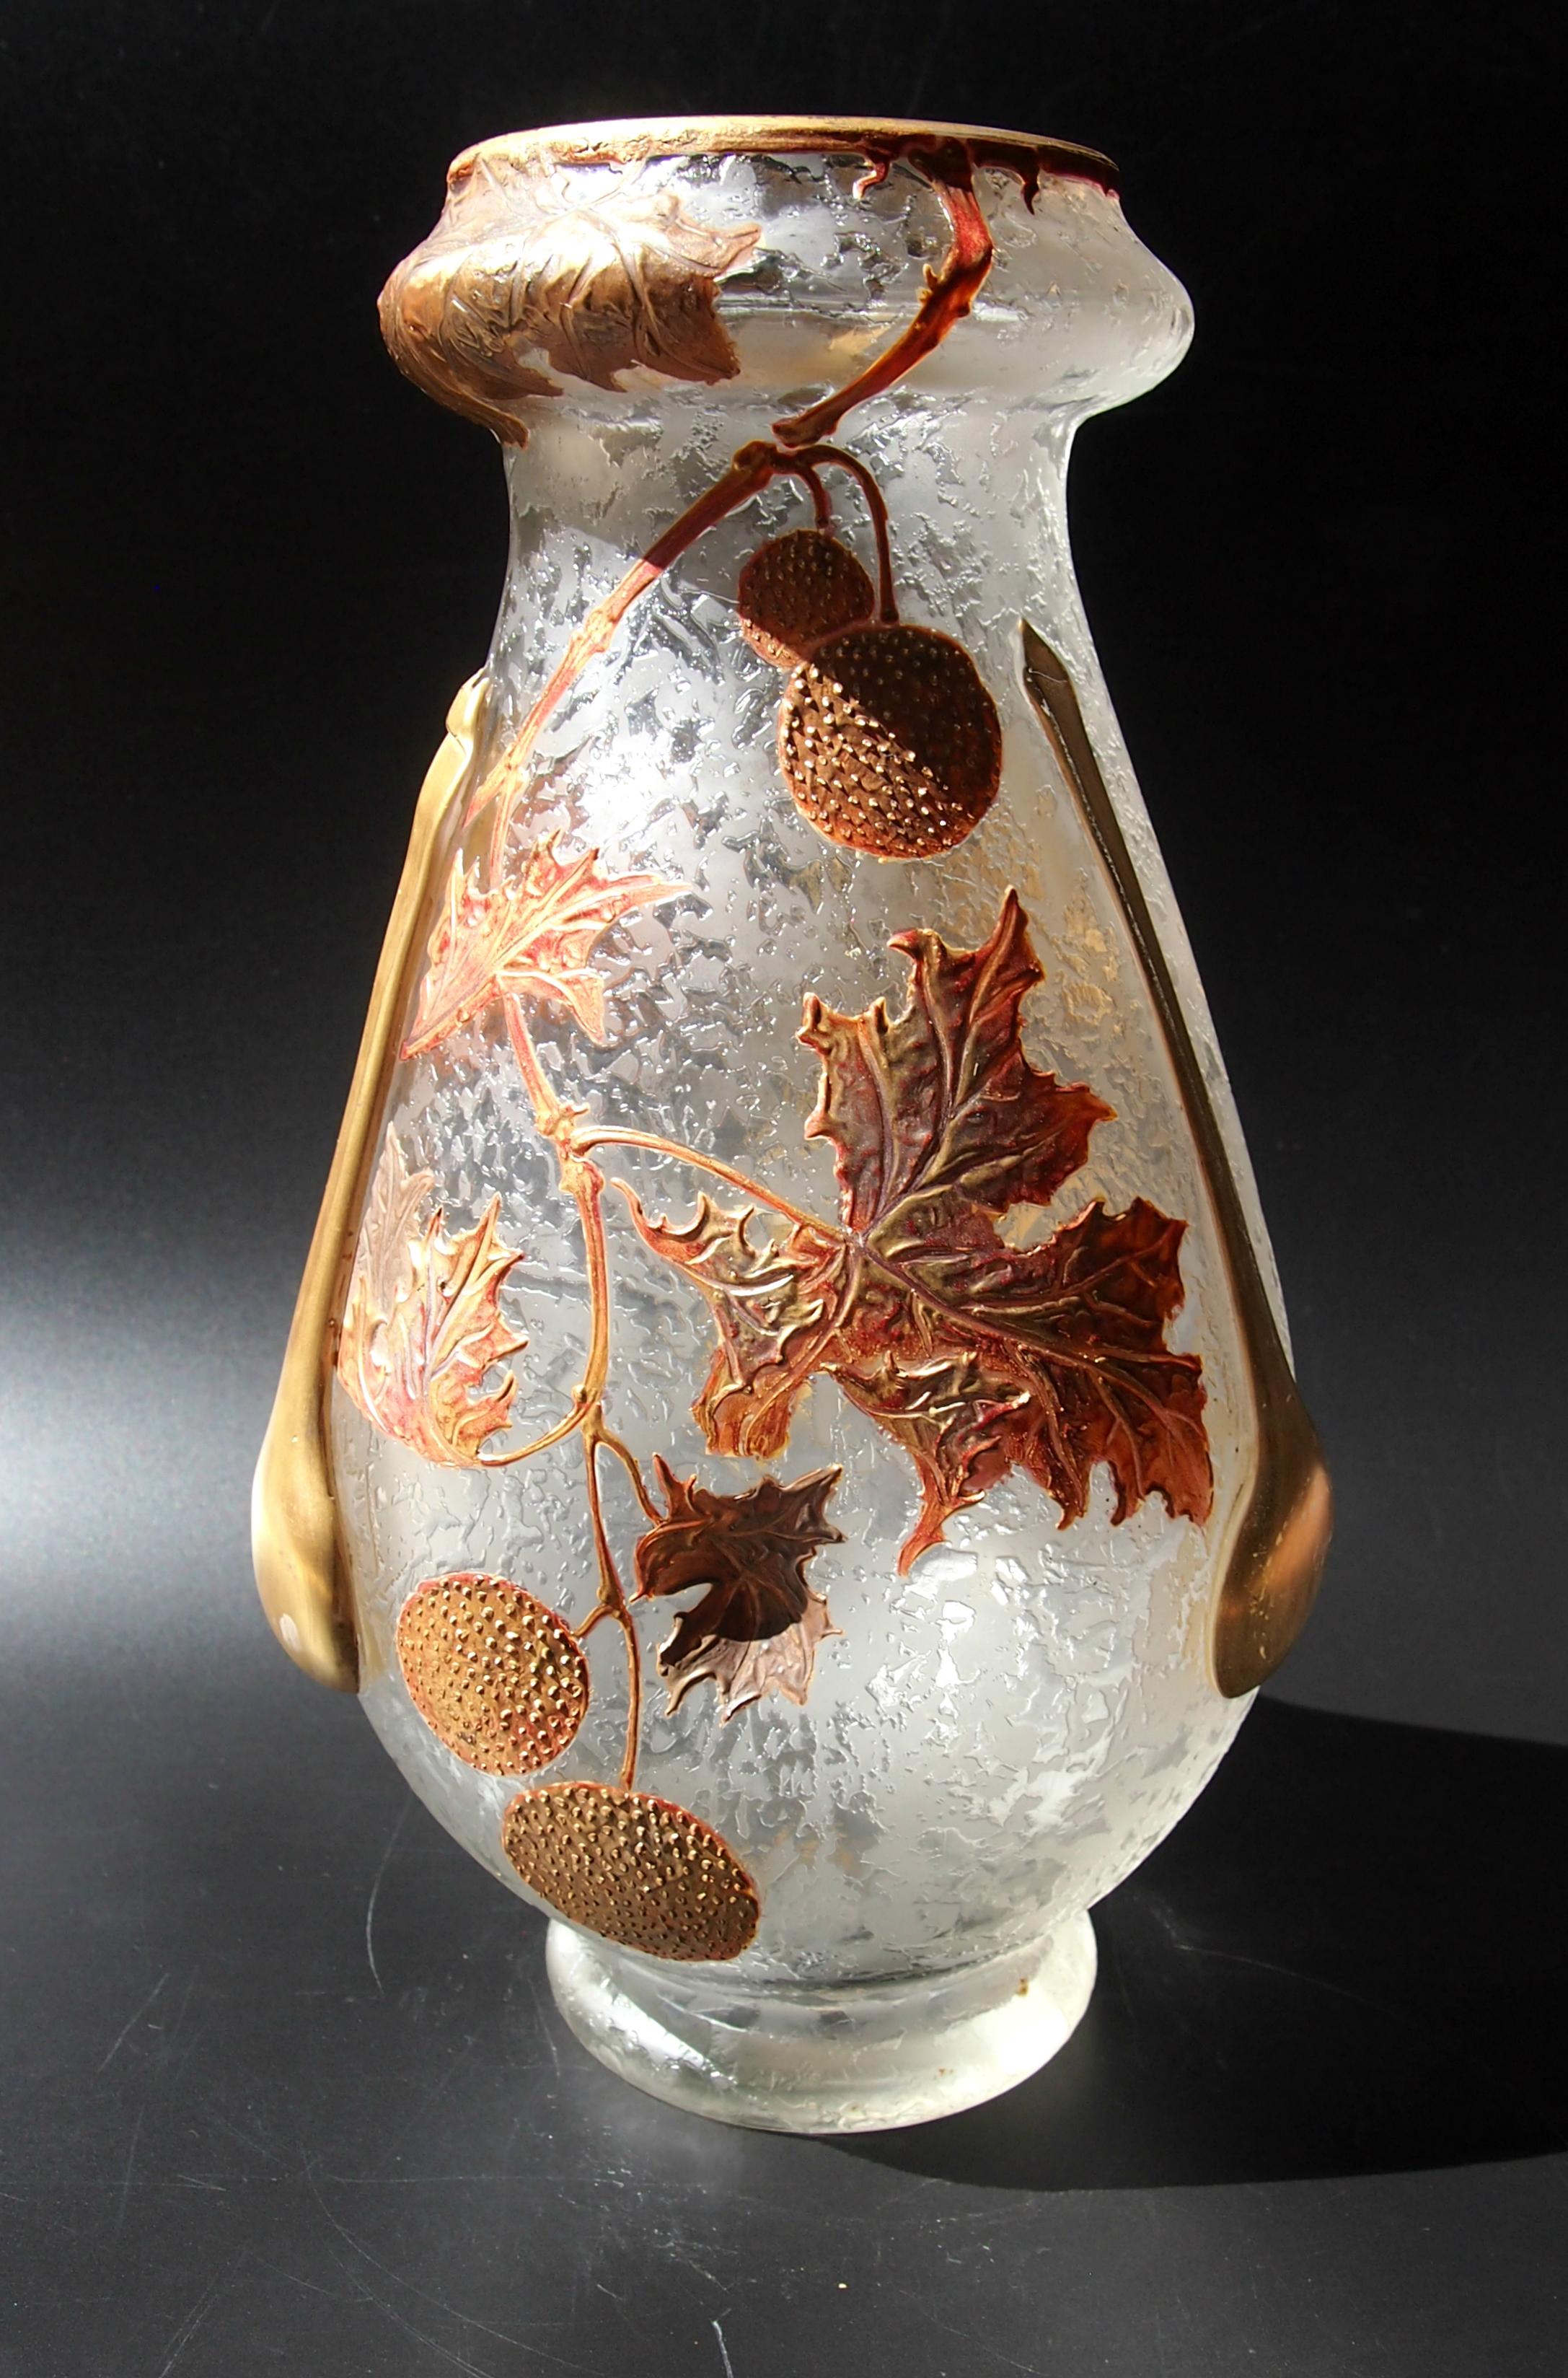 Stunning deeply acid cut back and polychrome gilded early Art Nouveau Legras 'tear' vase from the end of the 19th century. Decorated in a variety of muted metallic enamels with an autumnal scene of dried leaves and 'pom-pom' seed pods with three hot